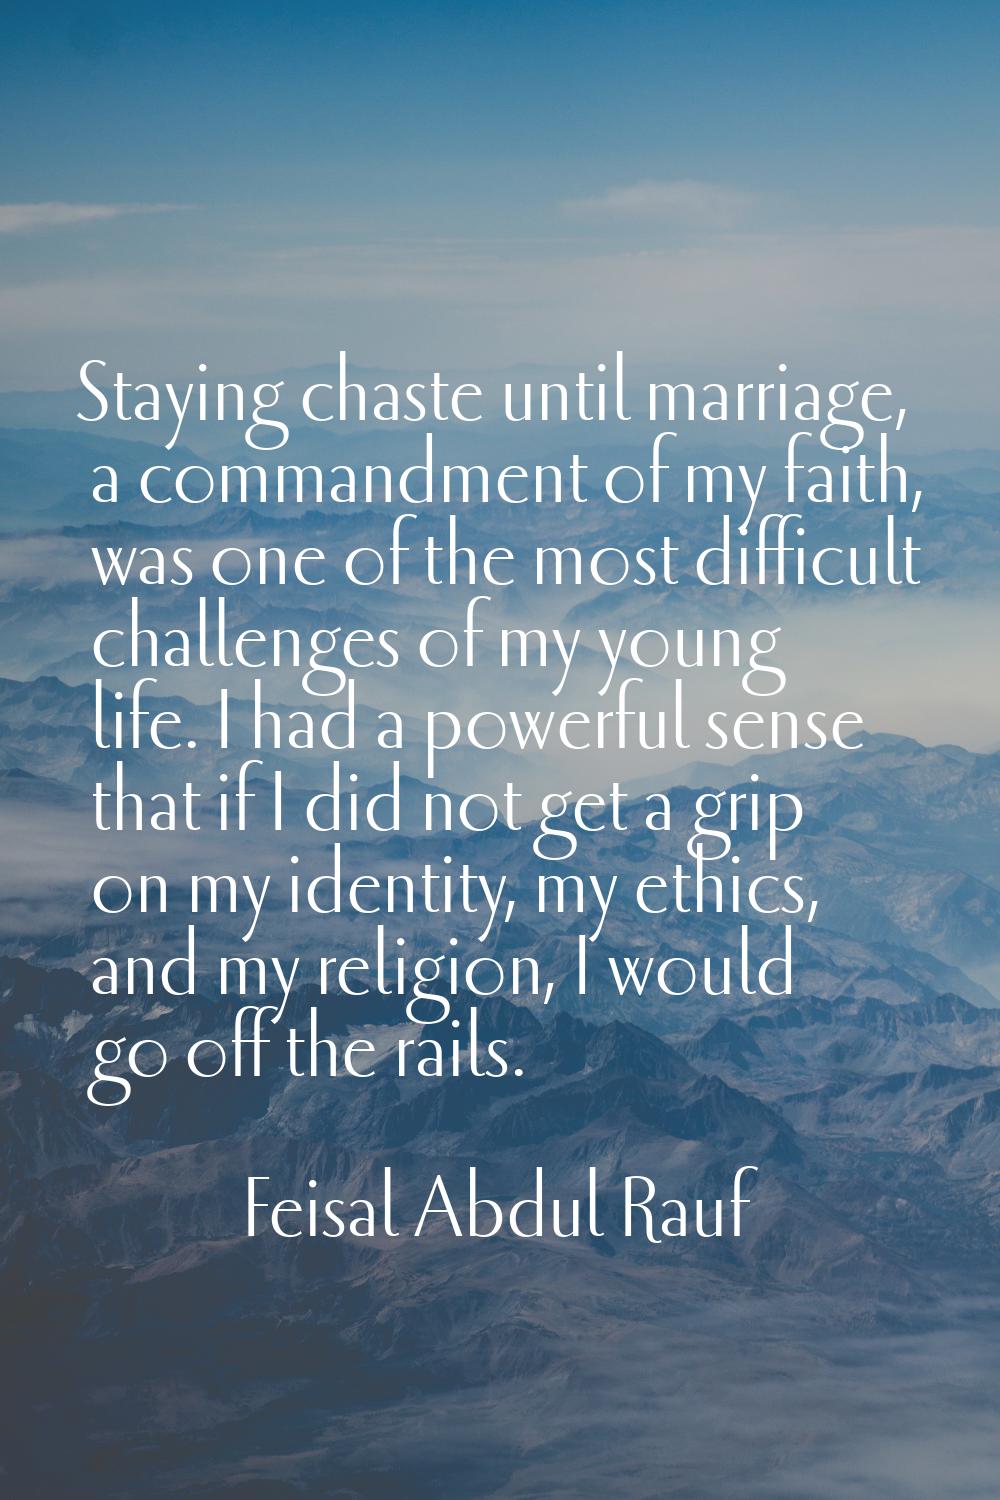 Staying chaste until marriage, a commandment of my faith, was one of the most difficult challenges 